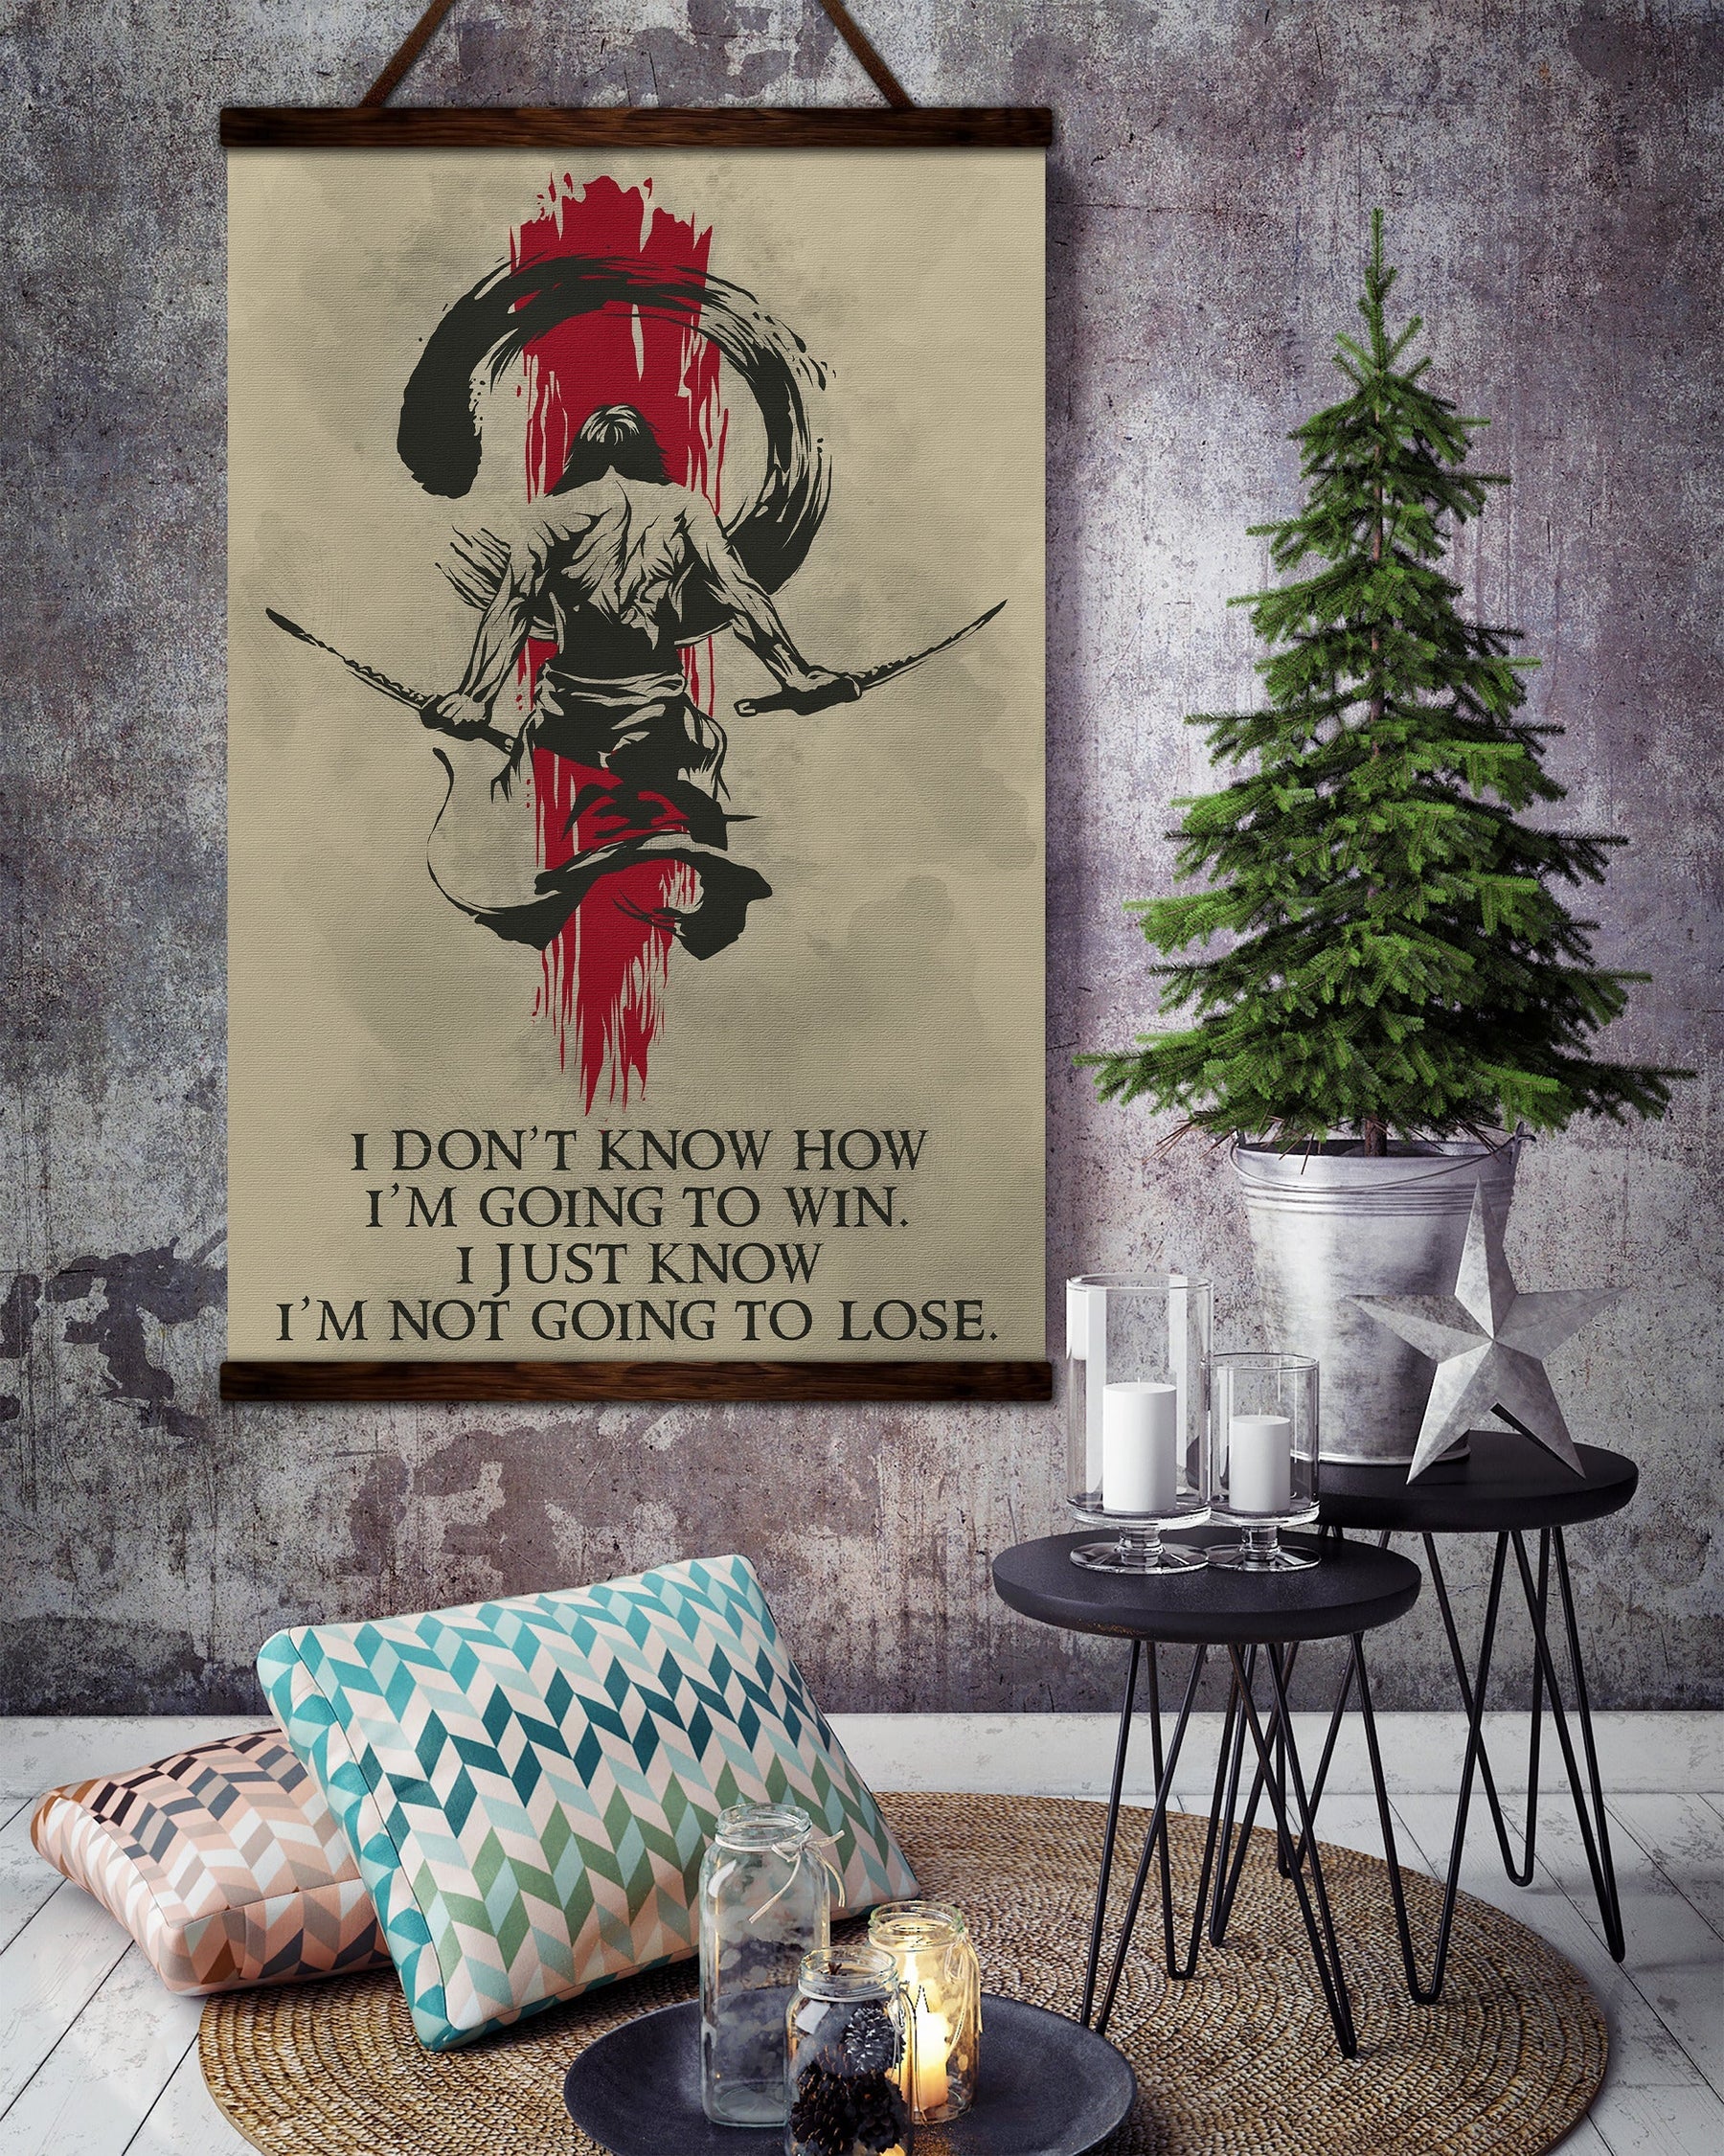 SA049 - I Don't Know How I'm Going To Win - I'm Just Know I’m Not Going To Lose - Vertical Poster - Vertical Canvas - Samurai Poster